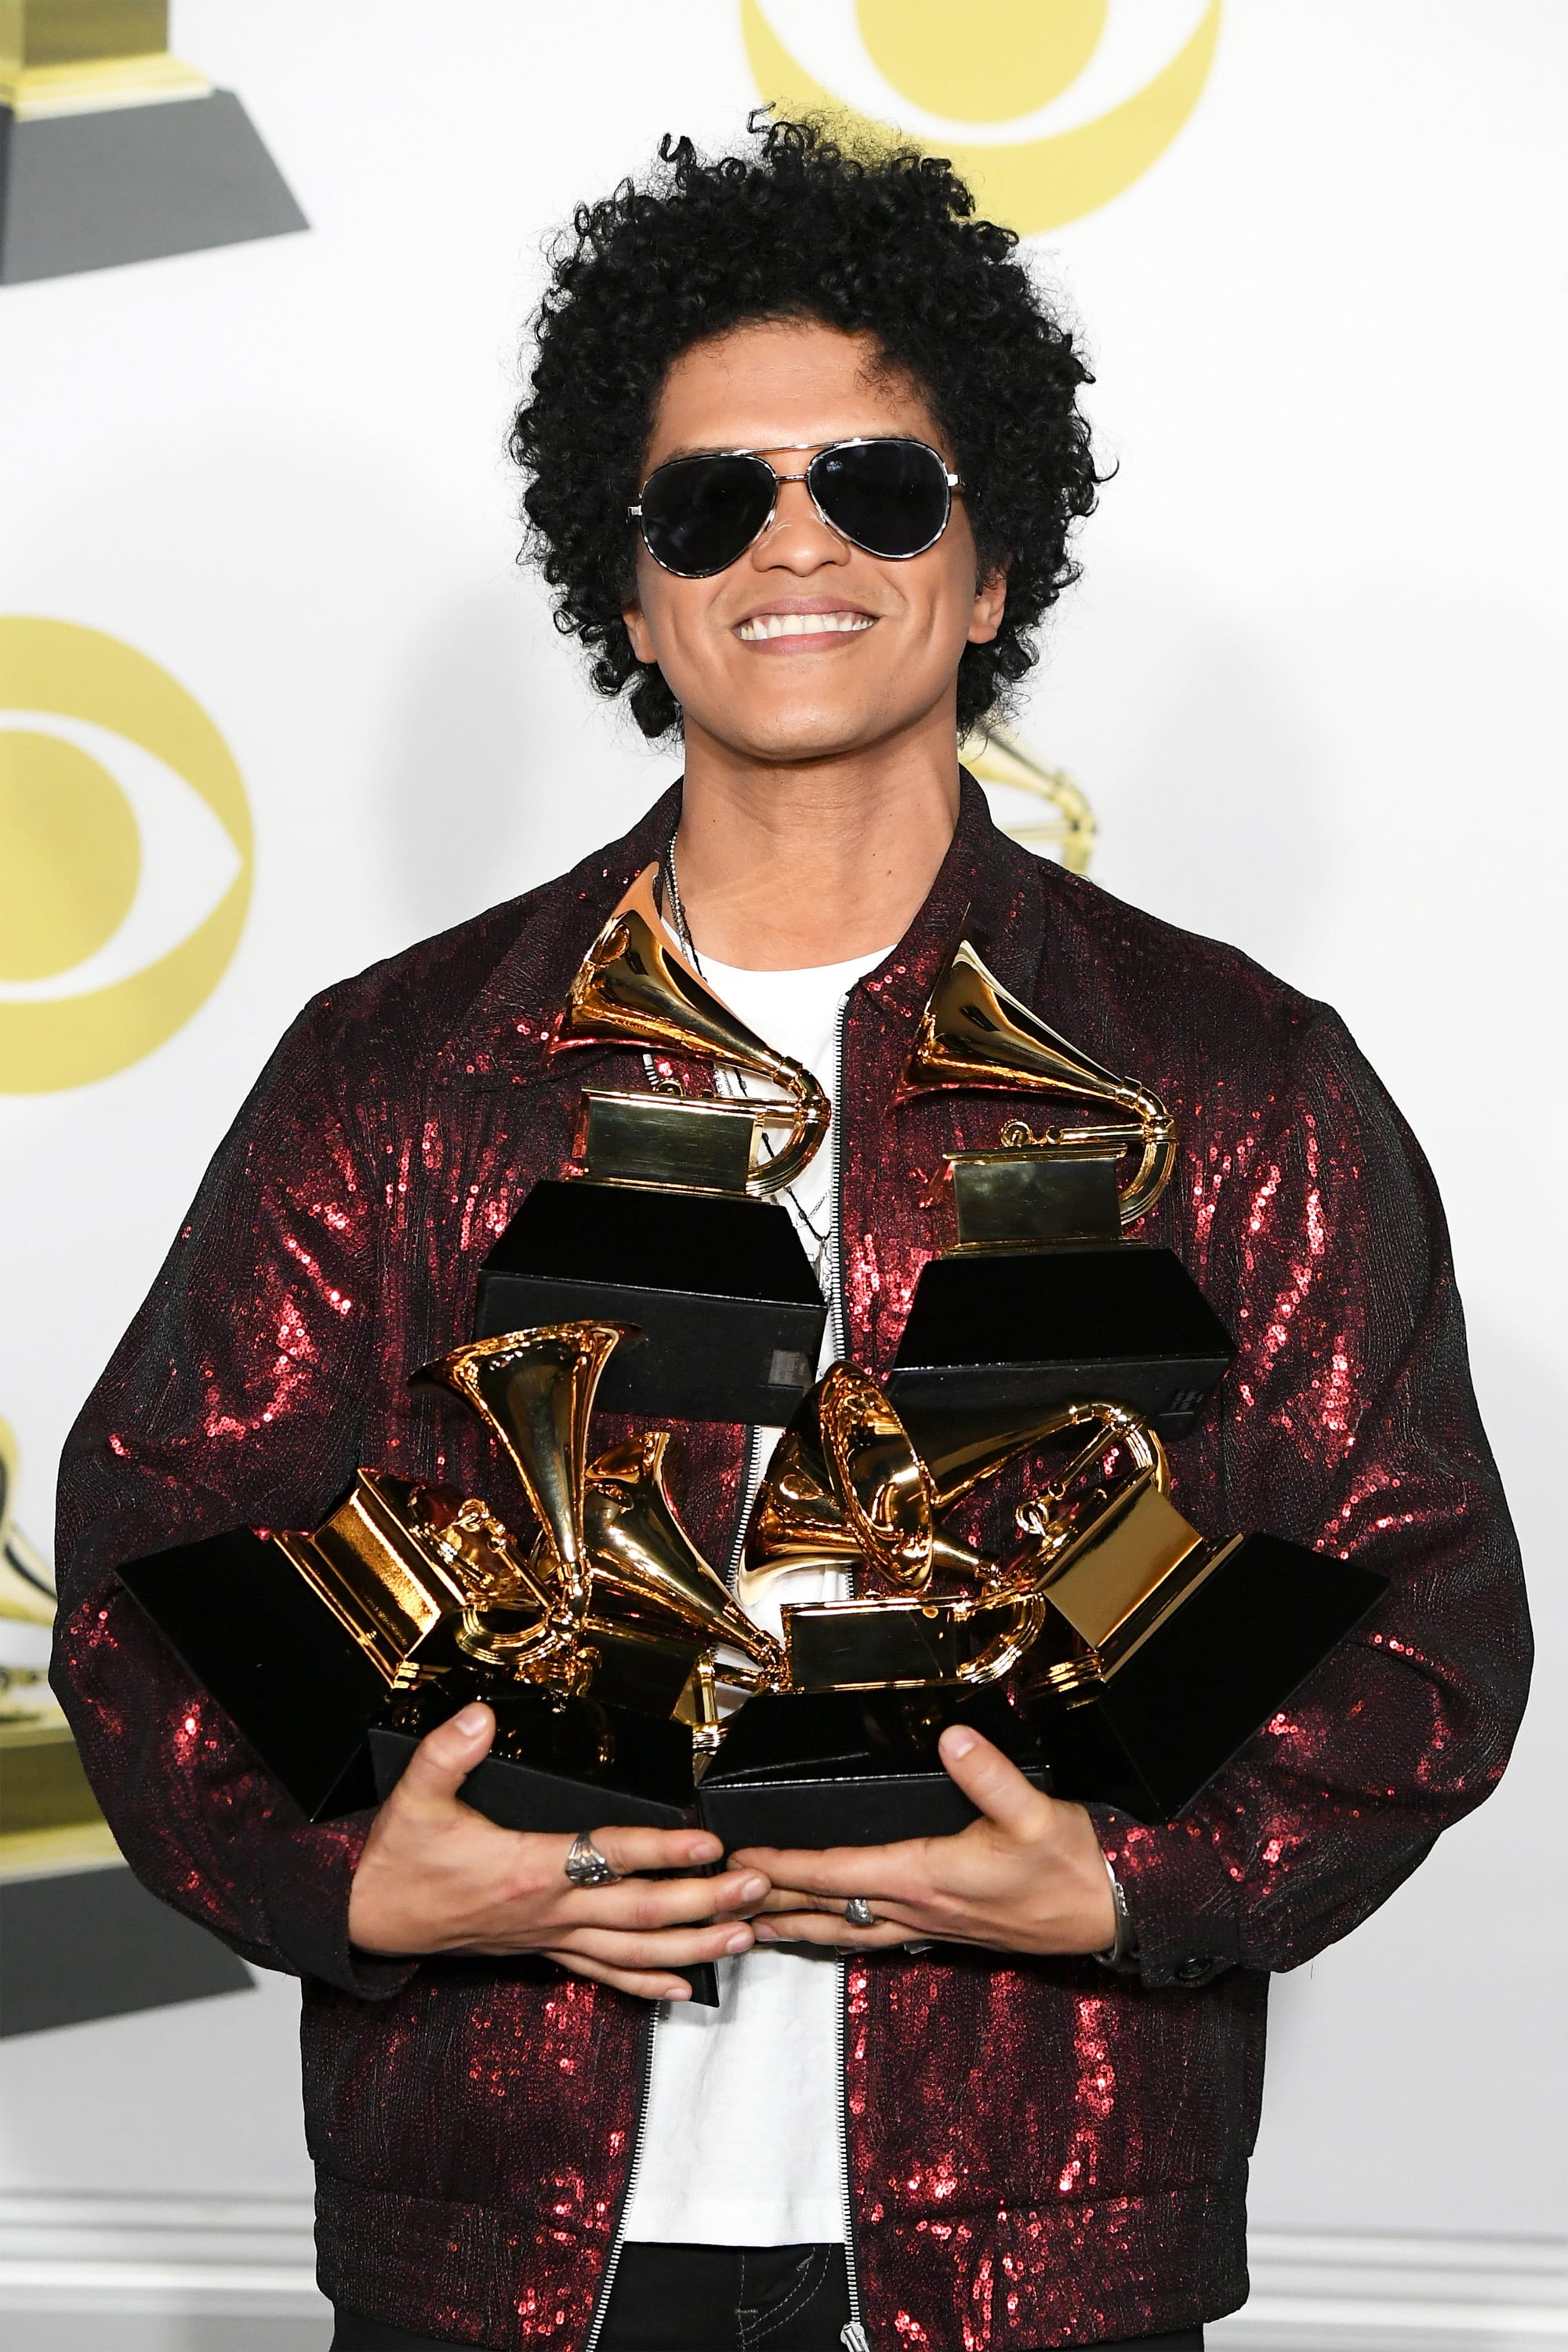 In 2018, Bruno Mars took home not one, but six trophies for best album, song of the year, record of the year, best R&B album, best R&B song, and best R&B performance.